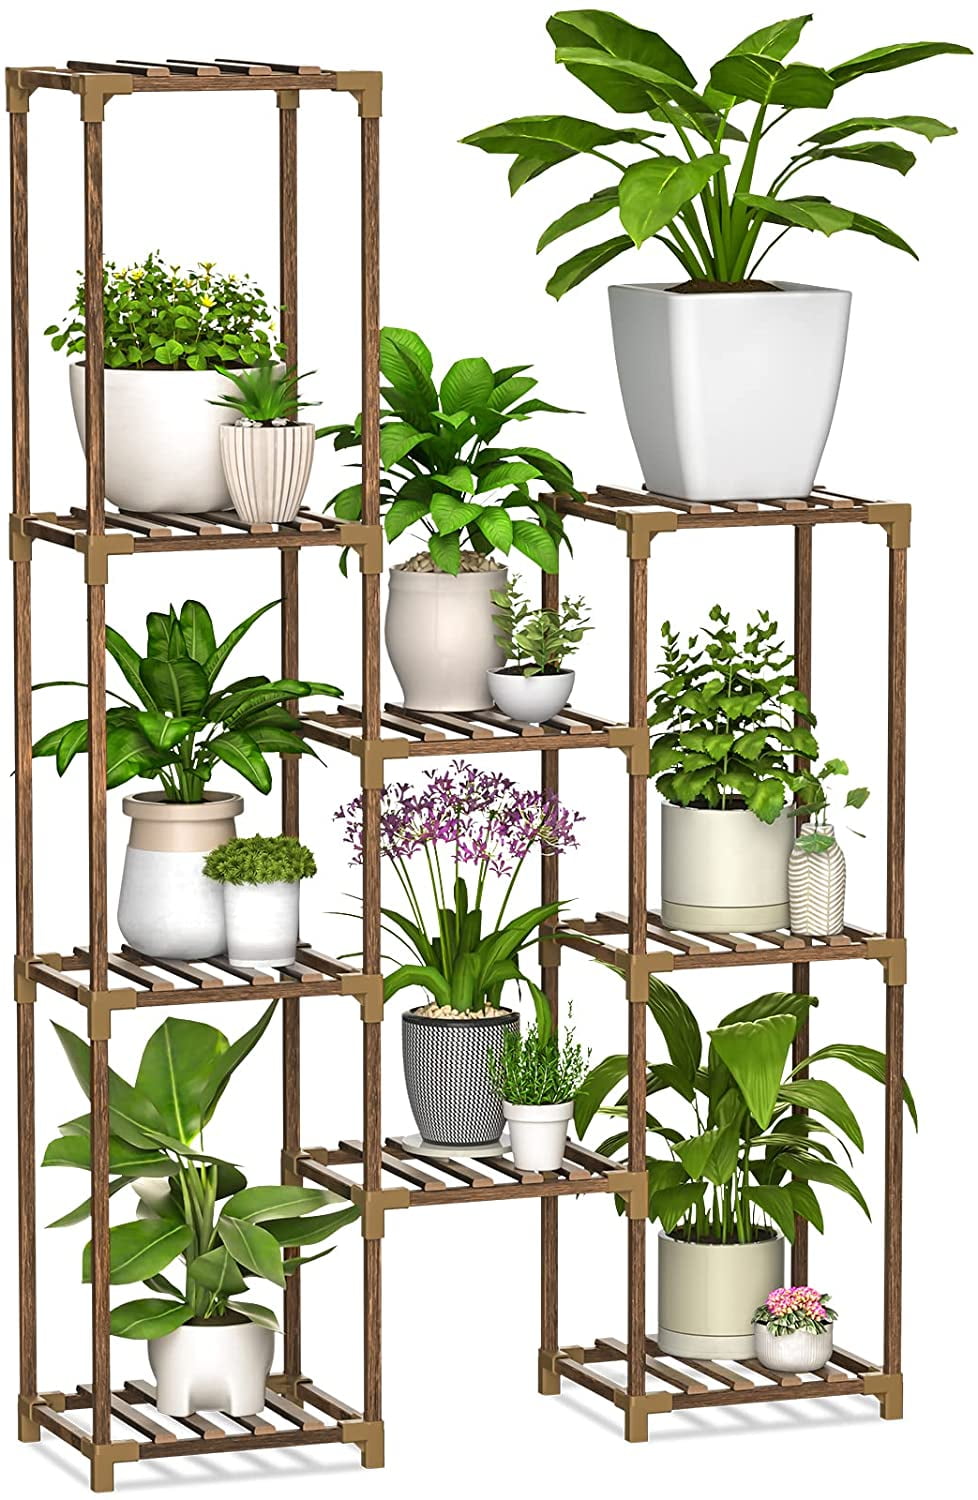 9 Potted Large Multi Layer Flower Stands Office Garden Wood Plant Stands Shelf Outdoor Bedroom Patio Homroll Plant Shelf Indoor Plant Shelf DIY Holder for Living Room Carbonized Balcony 